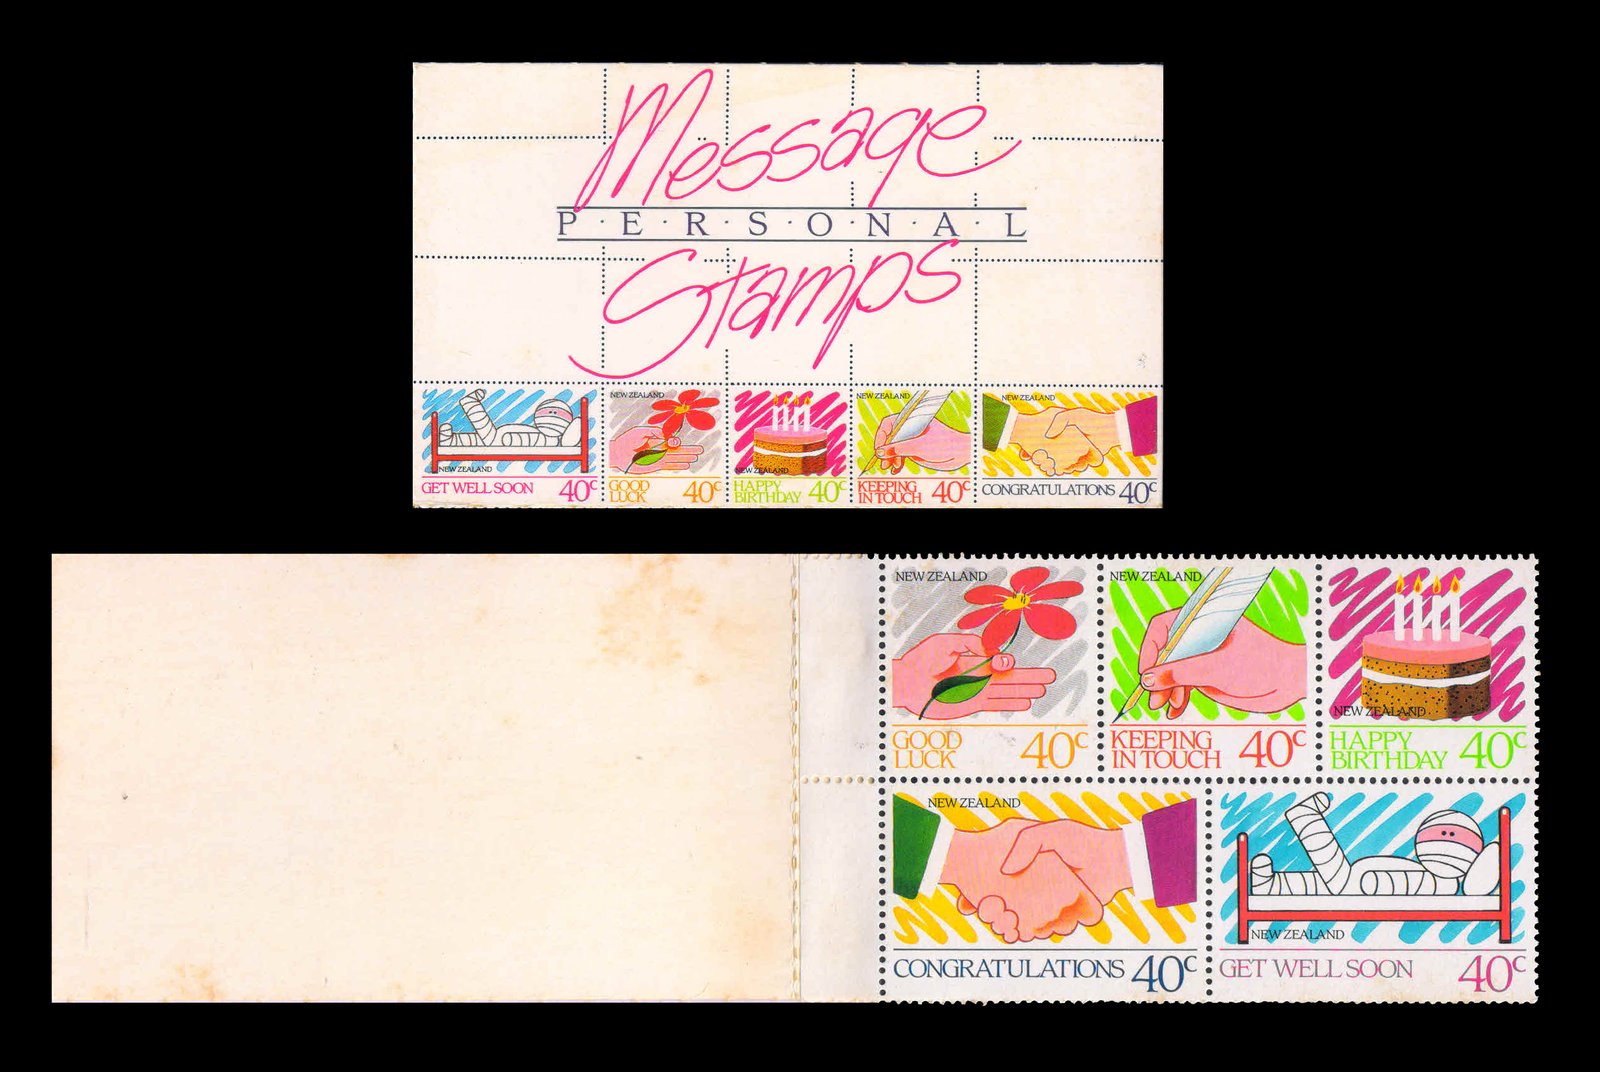 NEW ZEALAND 1988 - Greetings Stamps, Set of 5 Stamp Booklet, MNH, S.G. 1455-1459, Cat. � 3.50